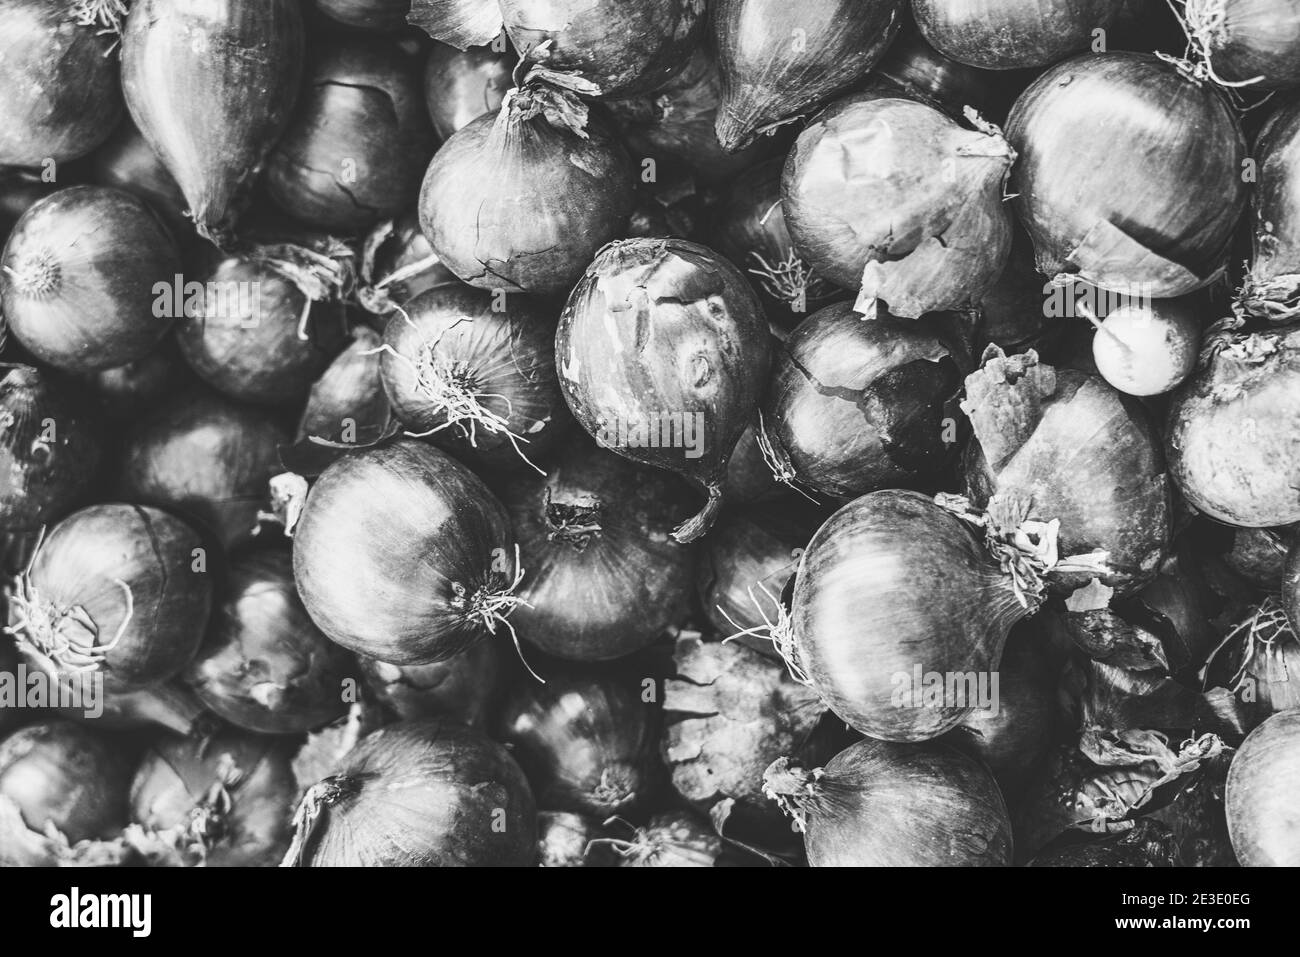 vintage black and white shot of a pile of onions Stock Photo